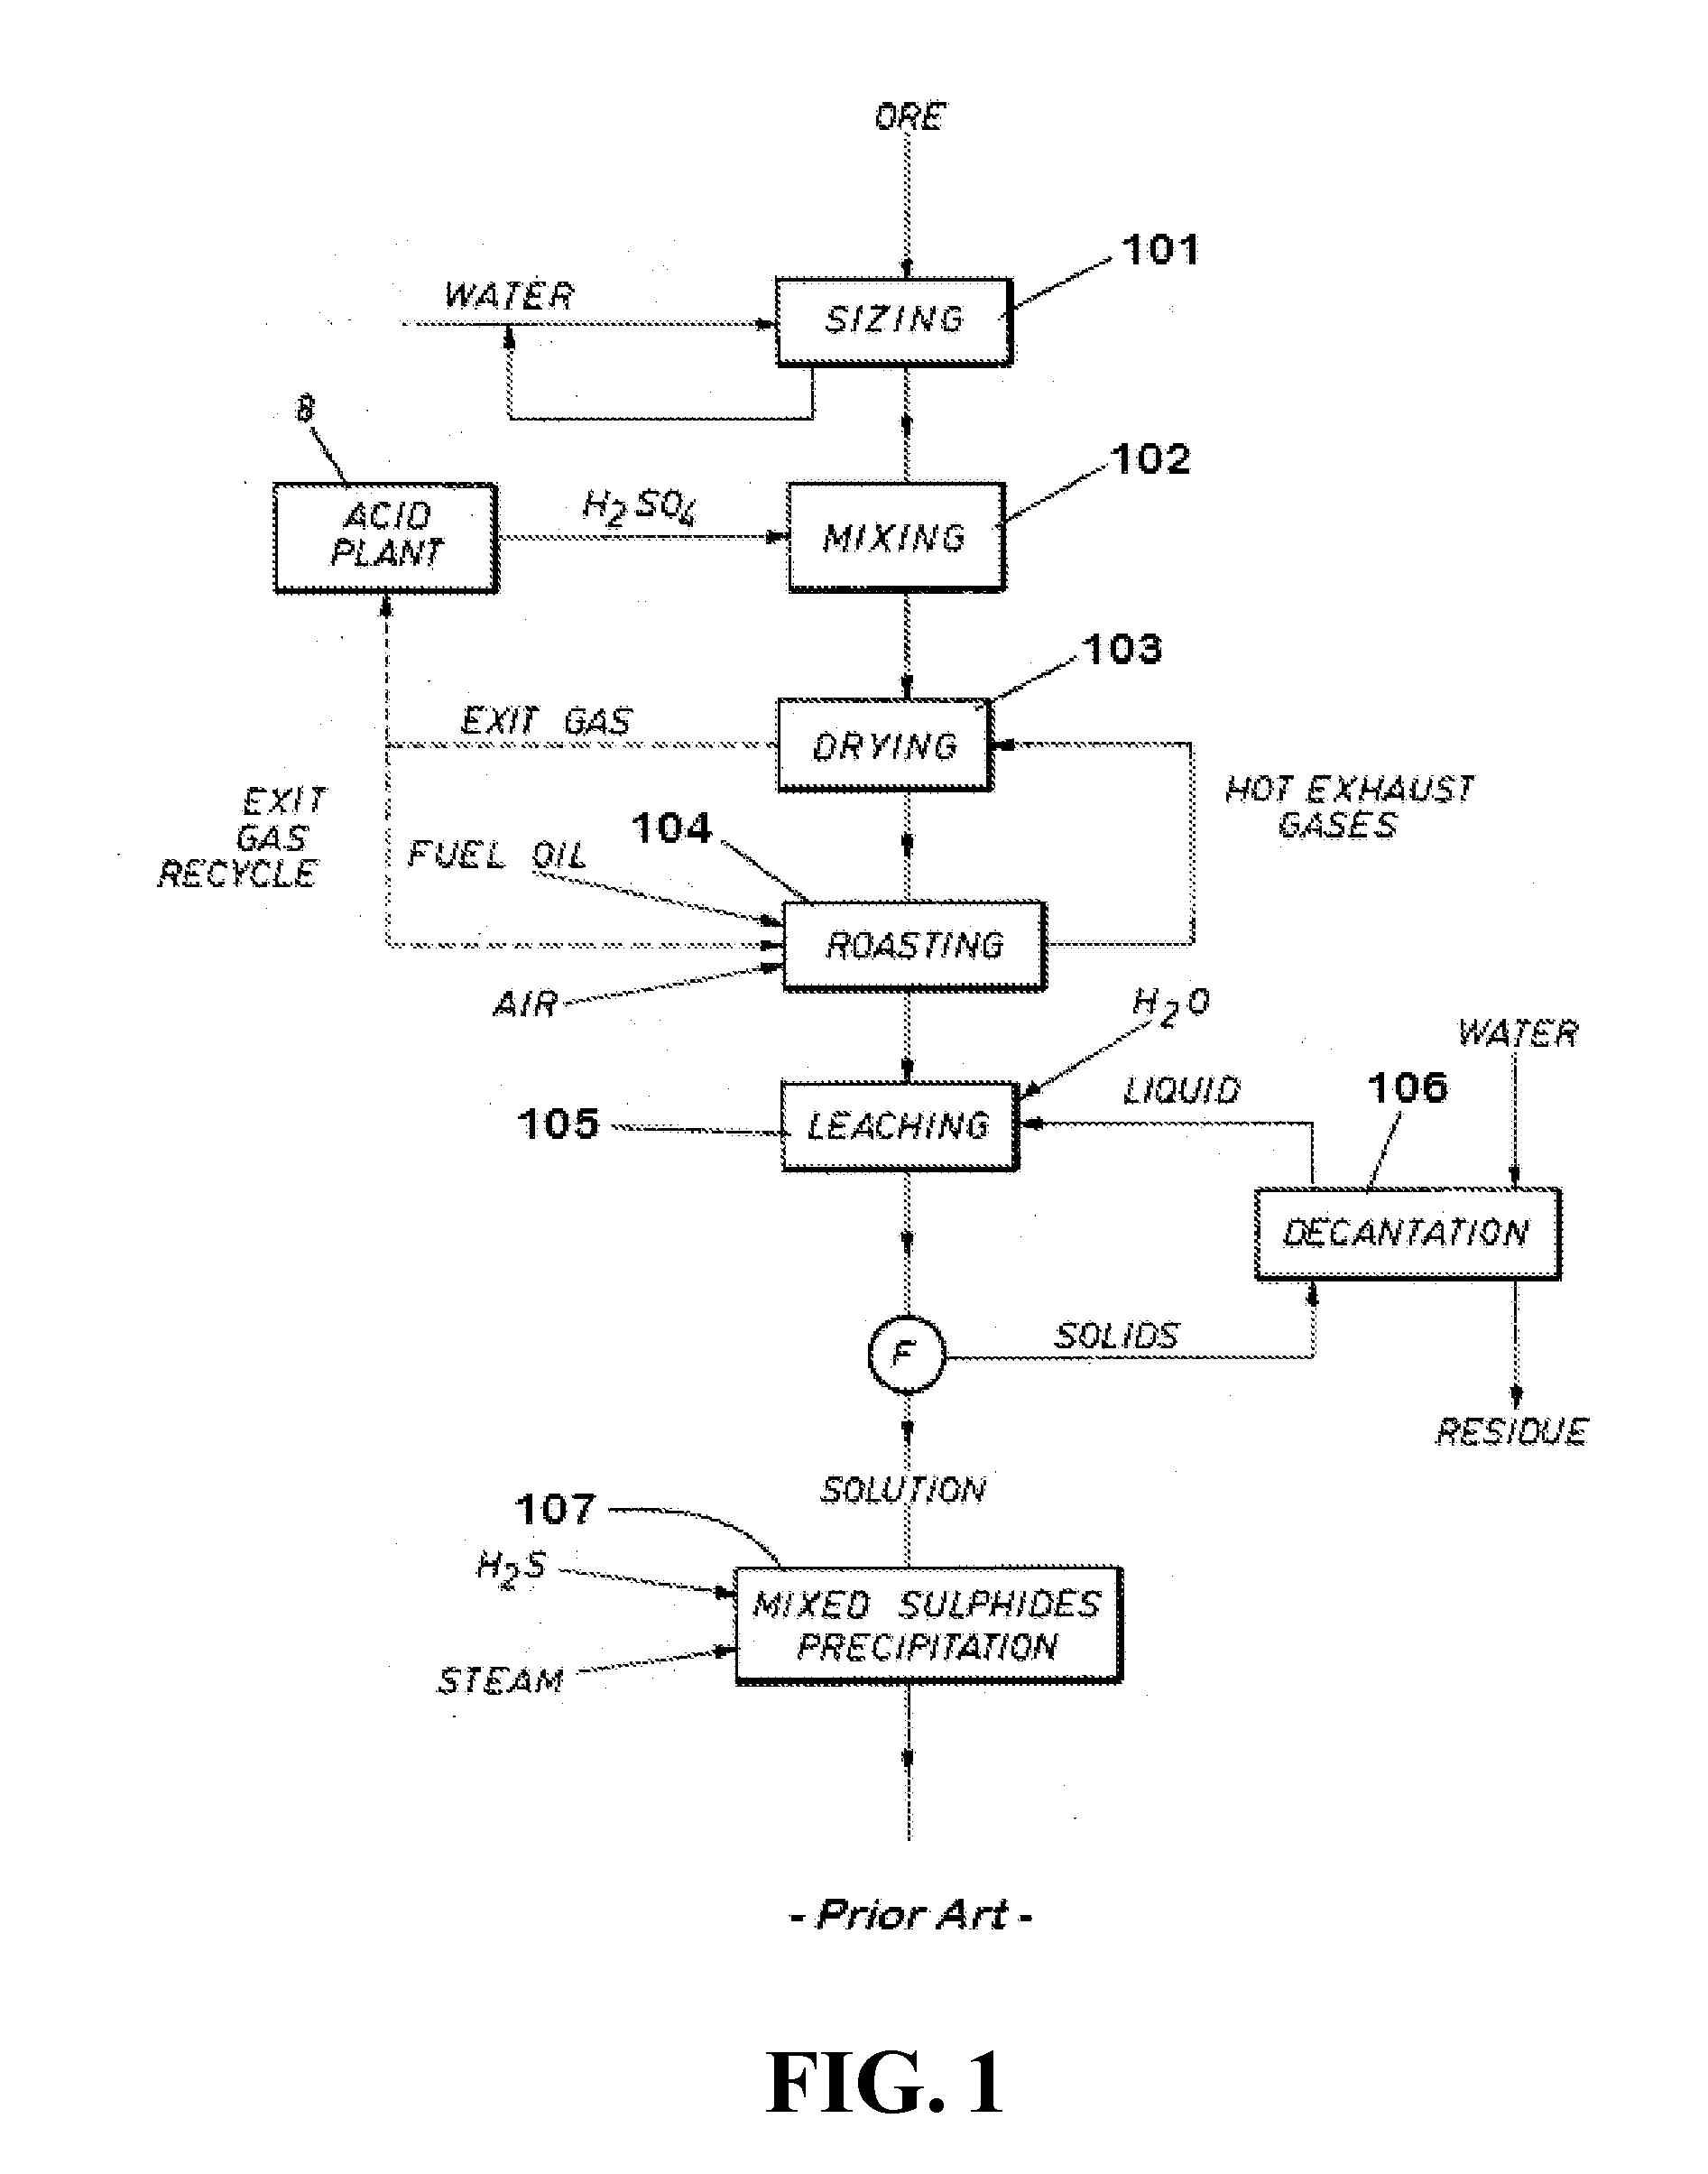 System and Method for Recovery of Nickel Values From Nickel-Containing Ores